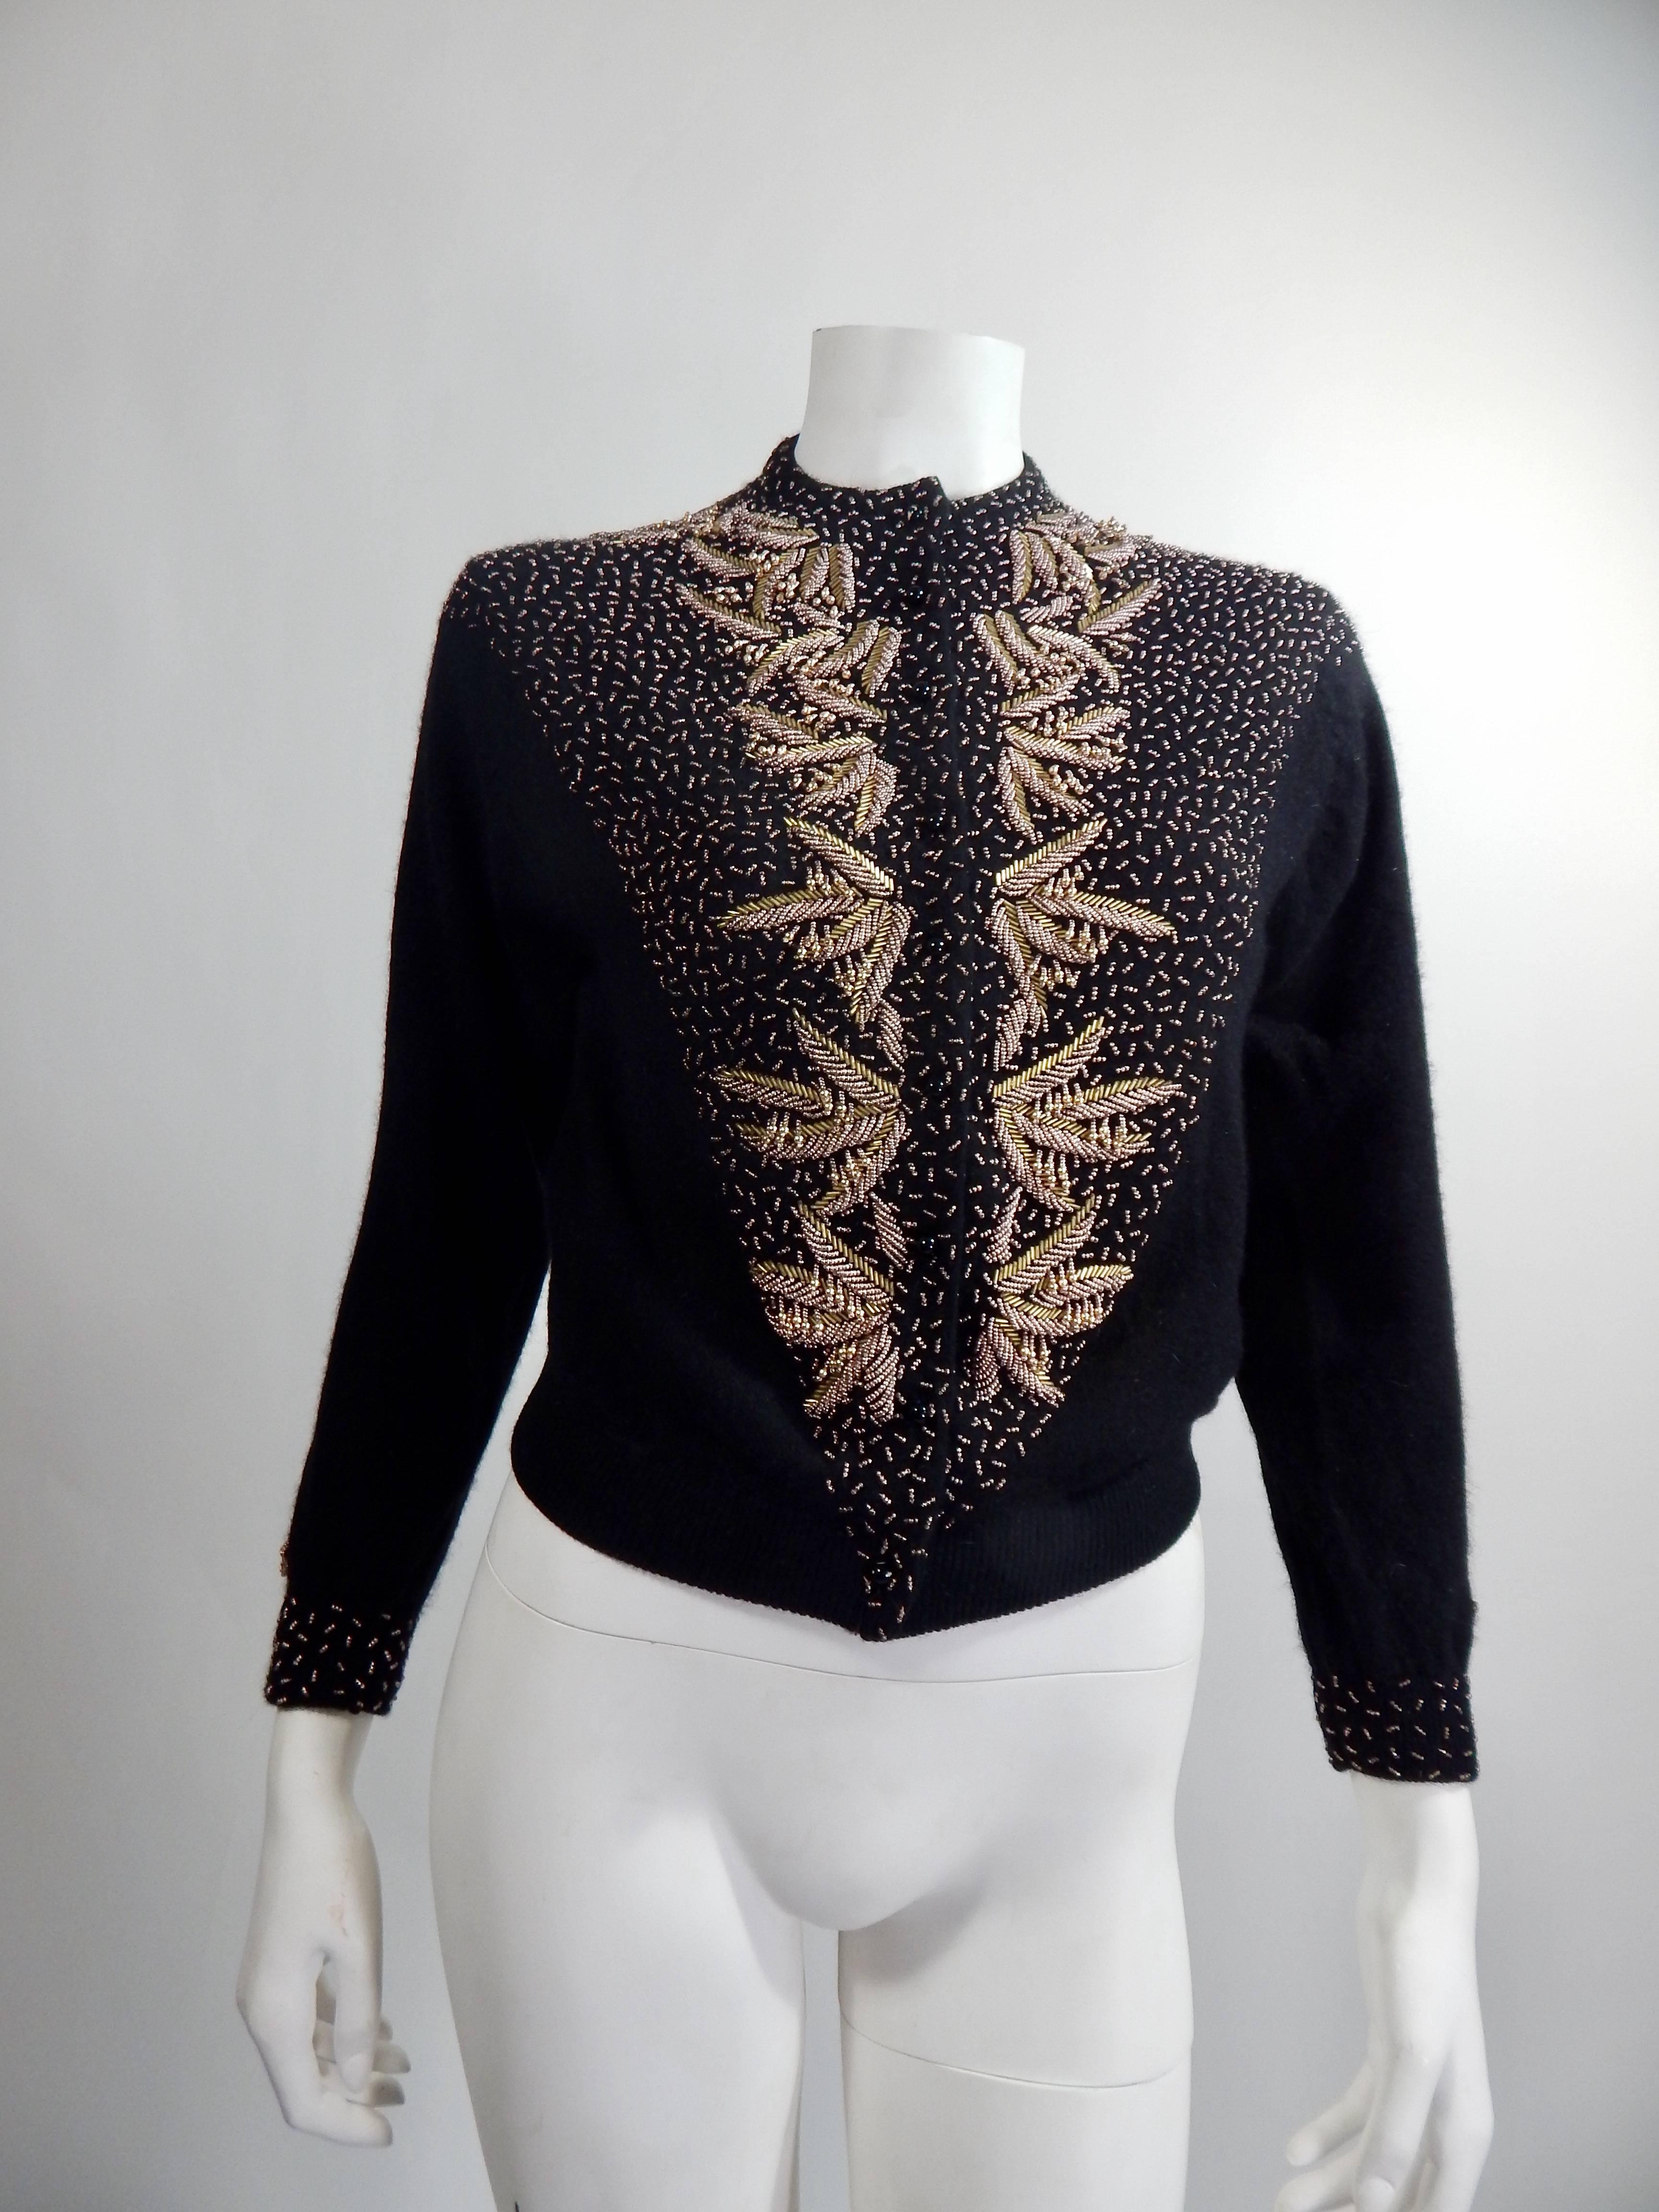 1950s Black Beaded Cardigan Sweater. Gold and Copper Beadwork. Black Silk. Lining. 70% Lambswool, 20% Angora, 10% Nylon. Size Small / Med. 
Measurements: Bust 35 , Length 22
